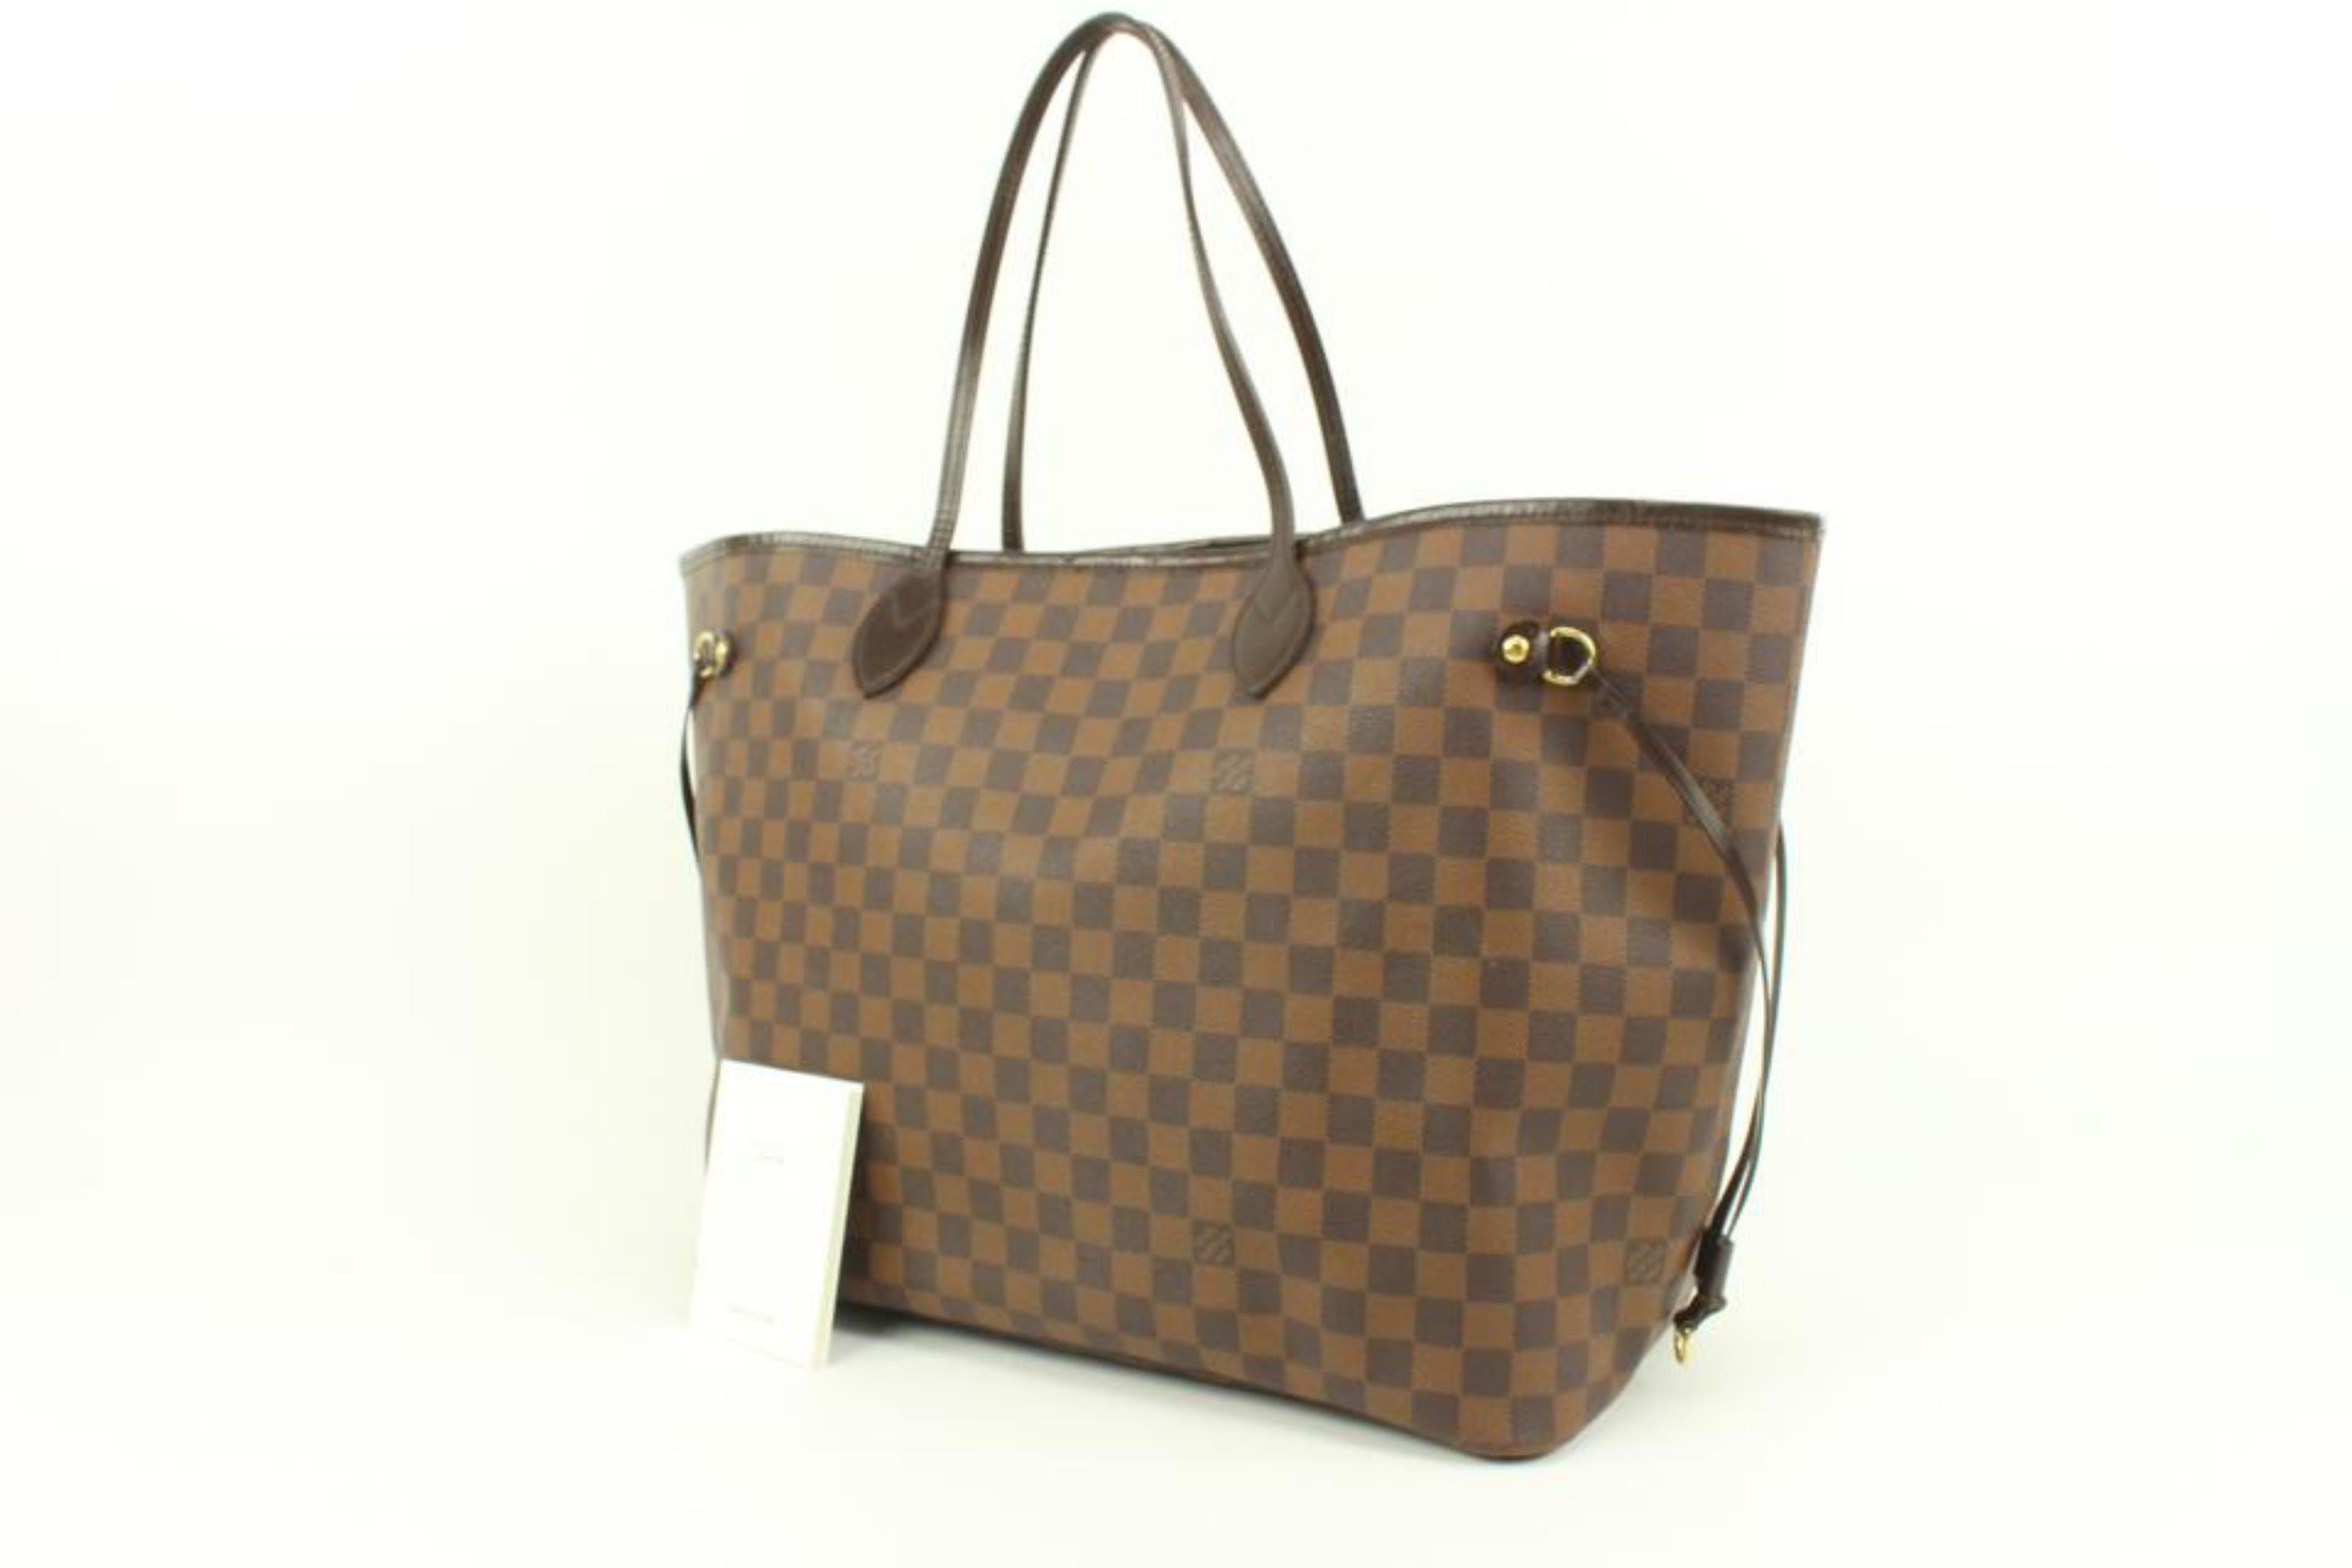 Louis Vuitton Damier Ebene Neverfull GM Tote Bag 83lv33s
Date Code/Serial Number: No Code
Made In: U.S.A
Measurements: Length:  21.5